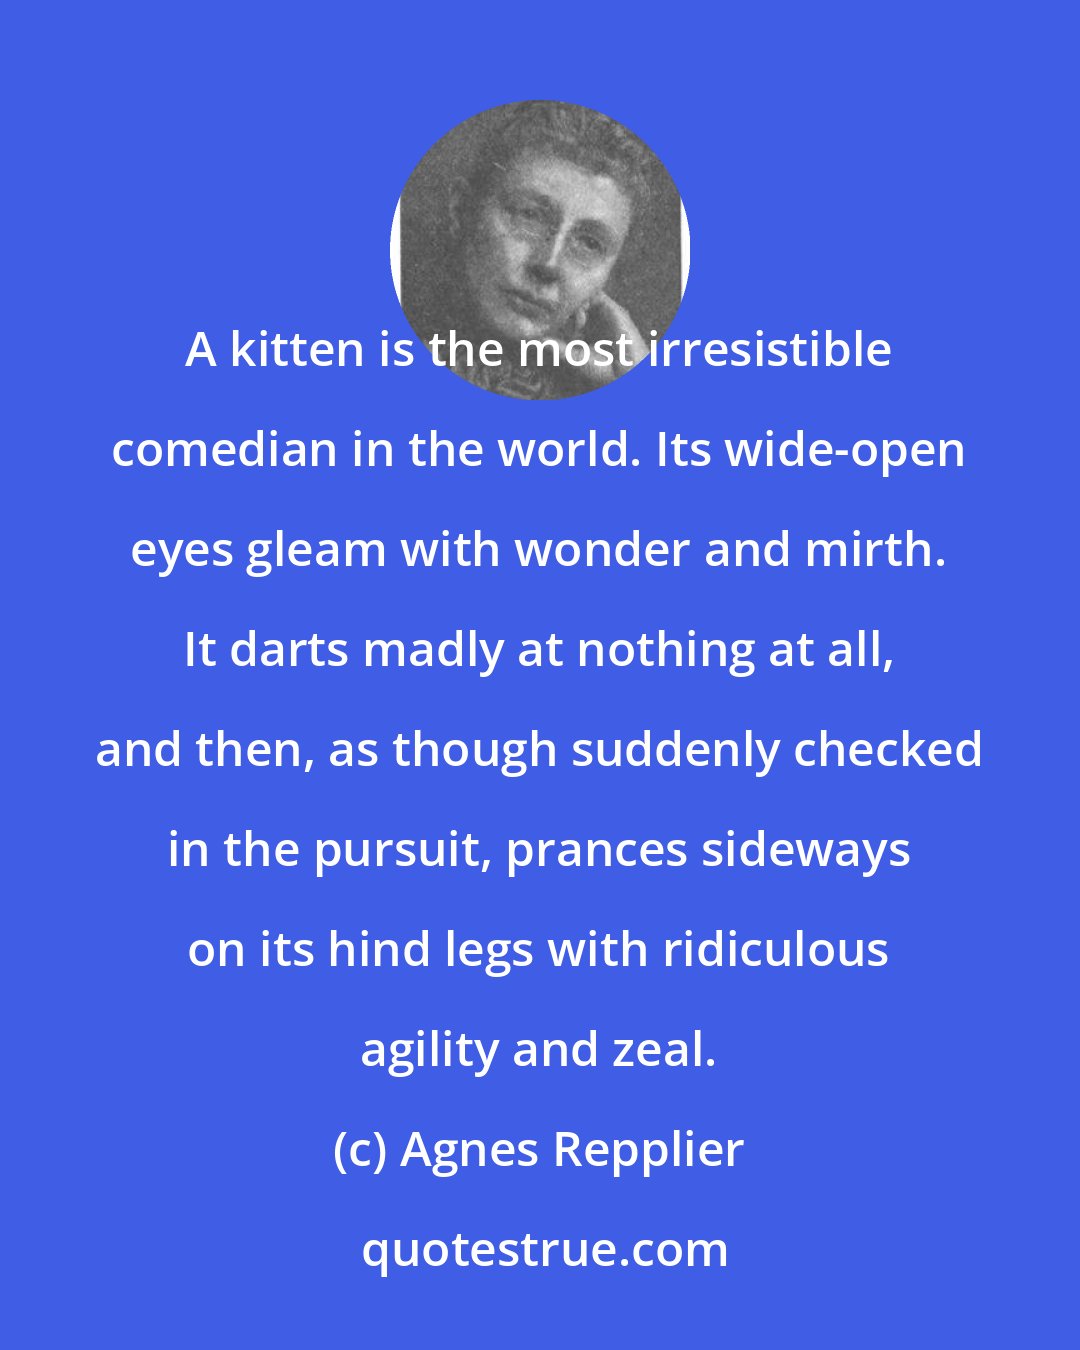 Agnes Repplier: A kitten is the most irresistible comedian in the world. Its wide-open eyes gleam with wonder and mirth. It darts madly at nothing at all, and then, as though suddenly checked in the pursuit, prances sideways on its hind legs with ridiculous agility and zeal.